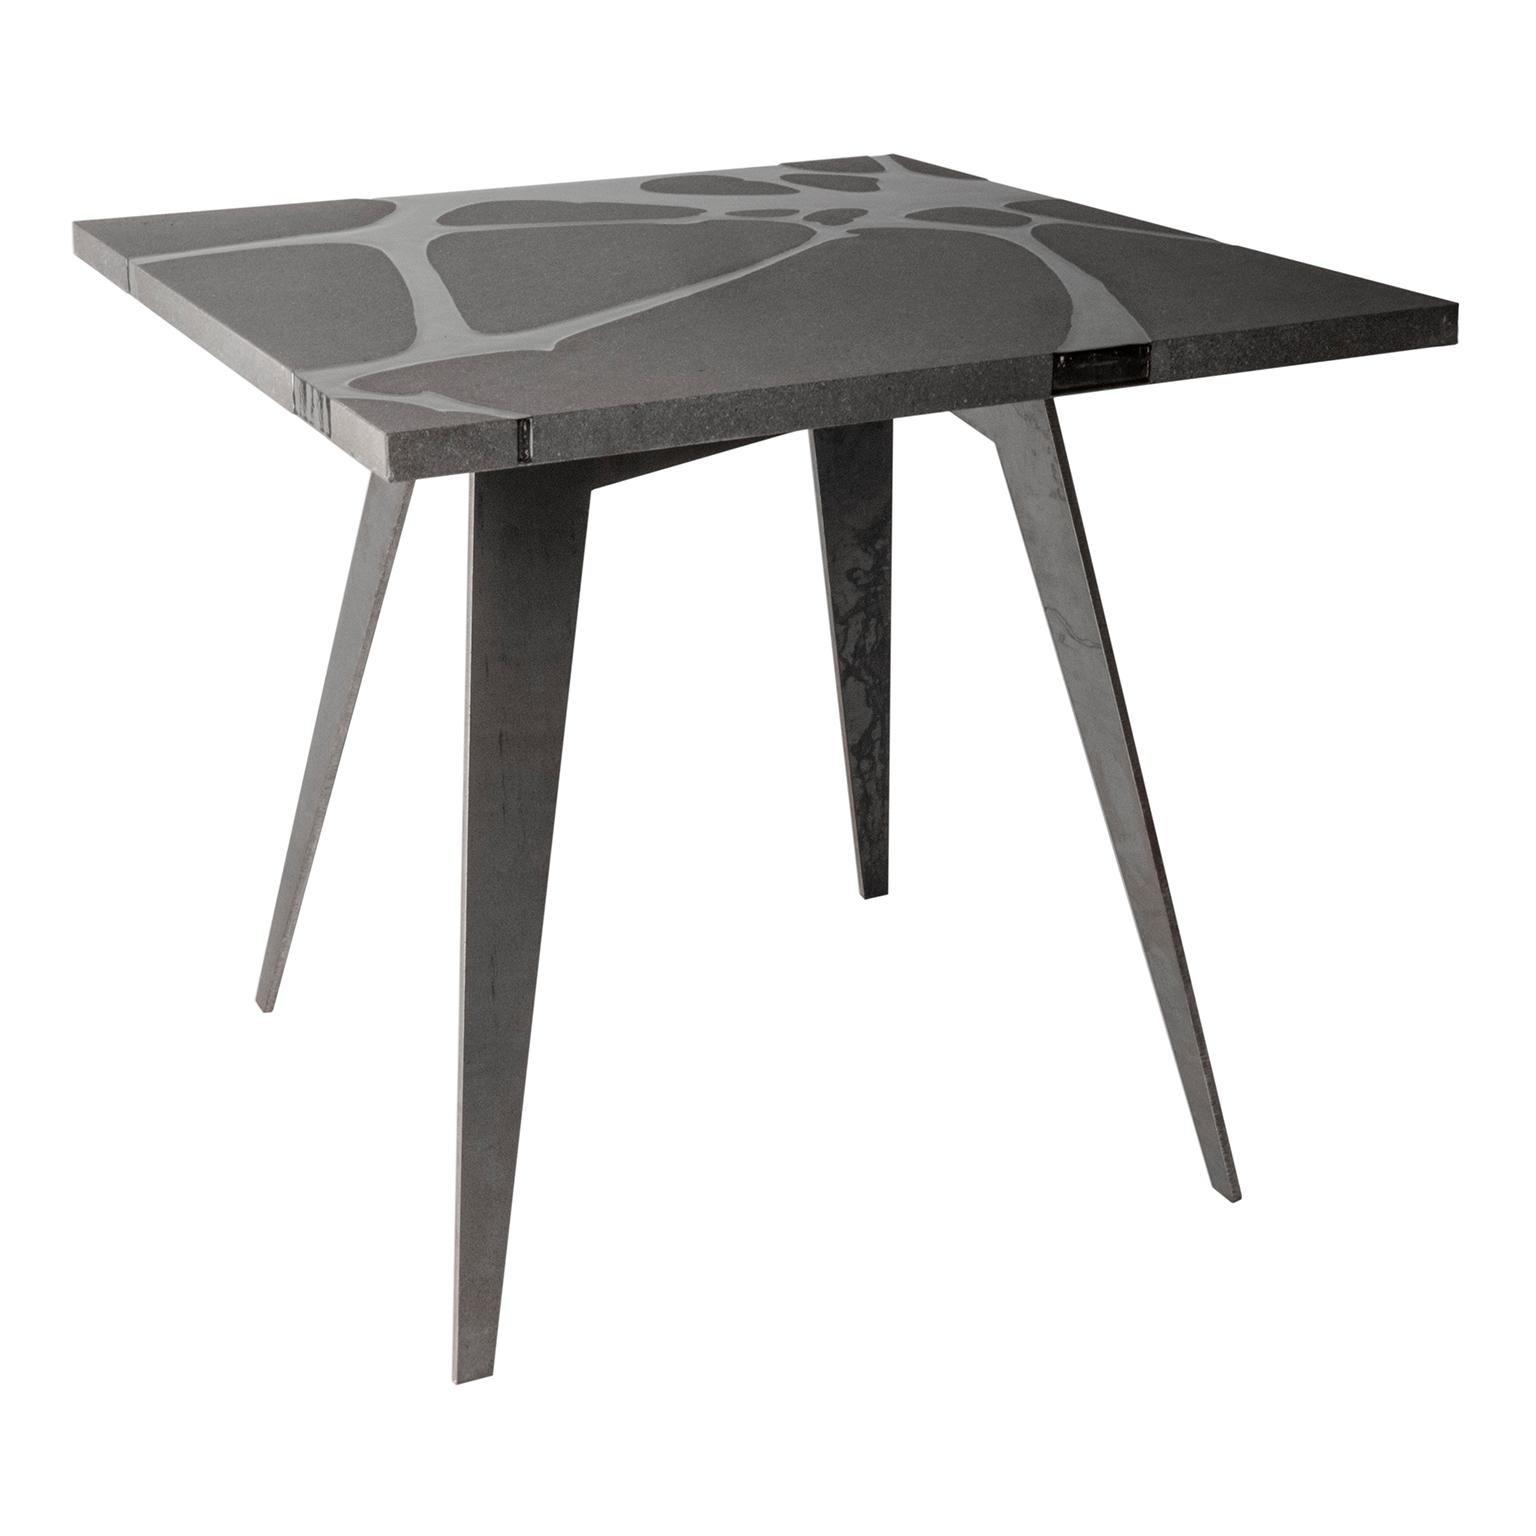 Modern Outdoor Table in Lava Stone and Steel, Venturae v2, Filodifumo For Sale